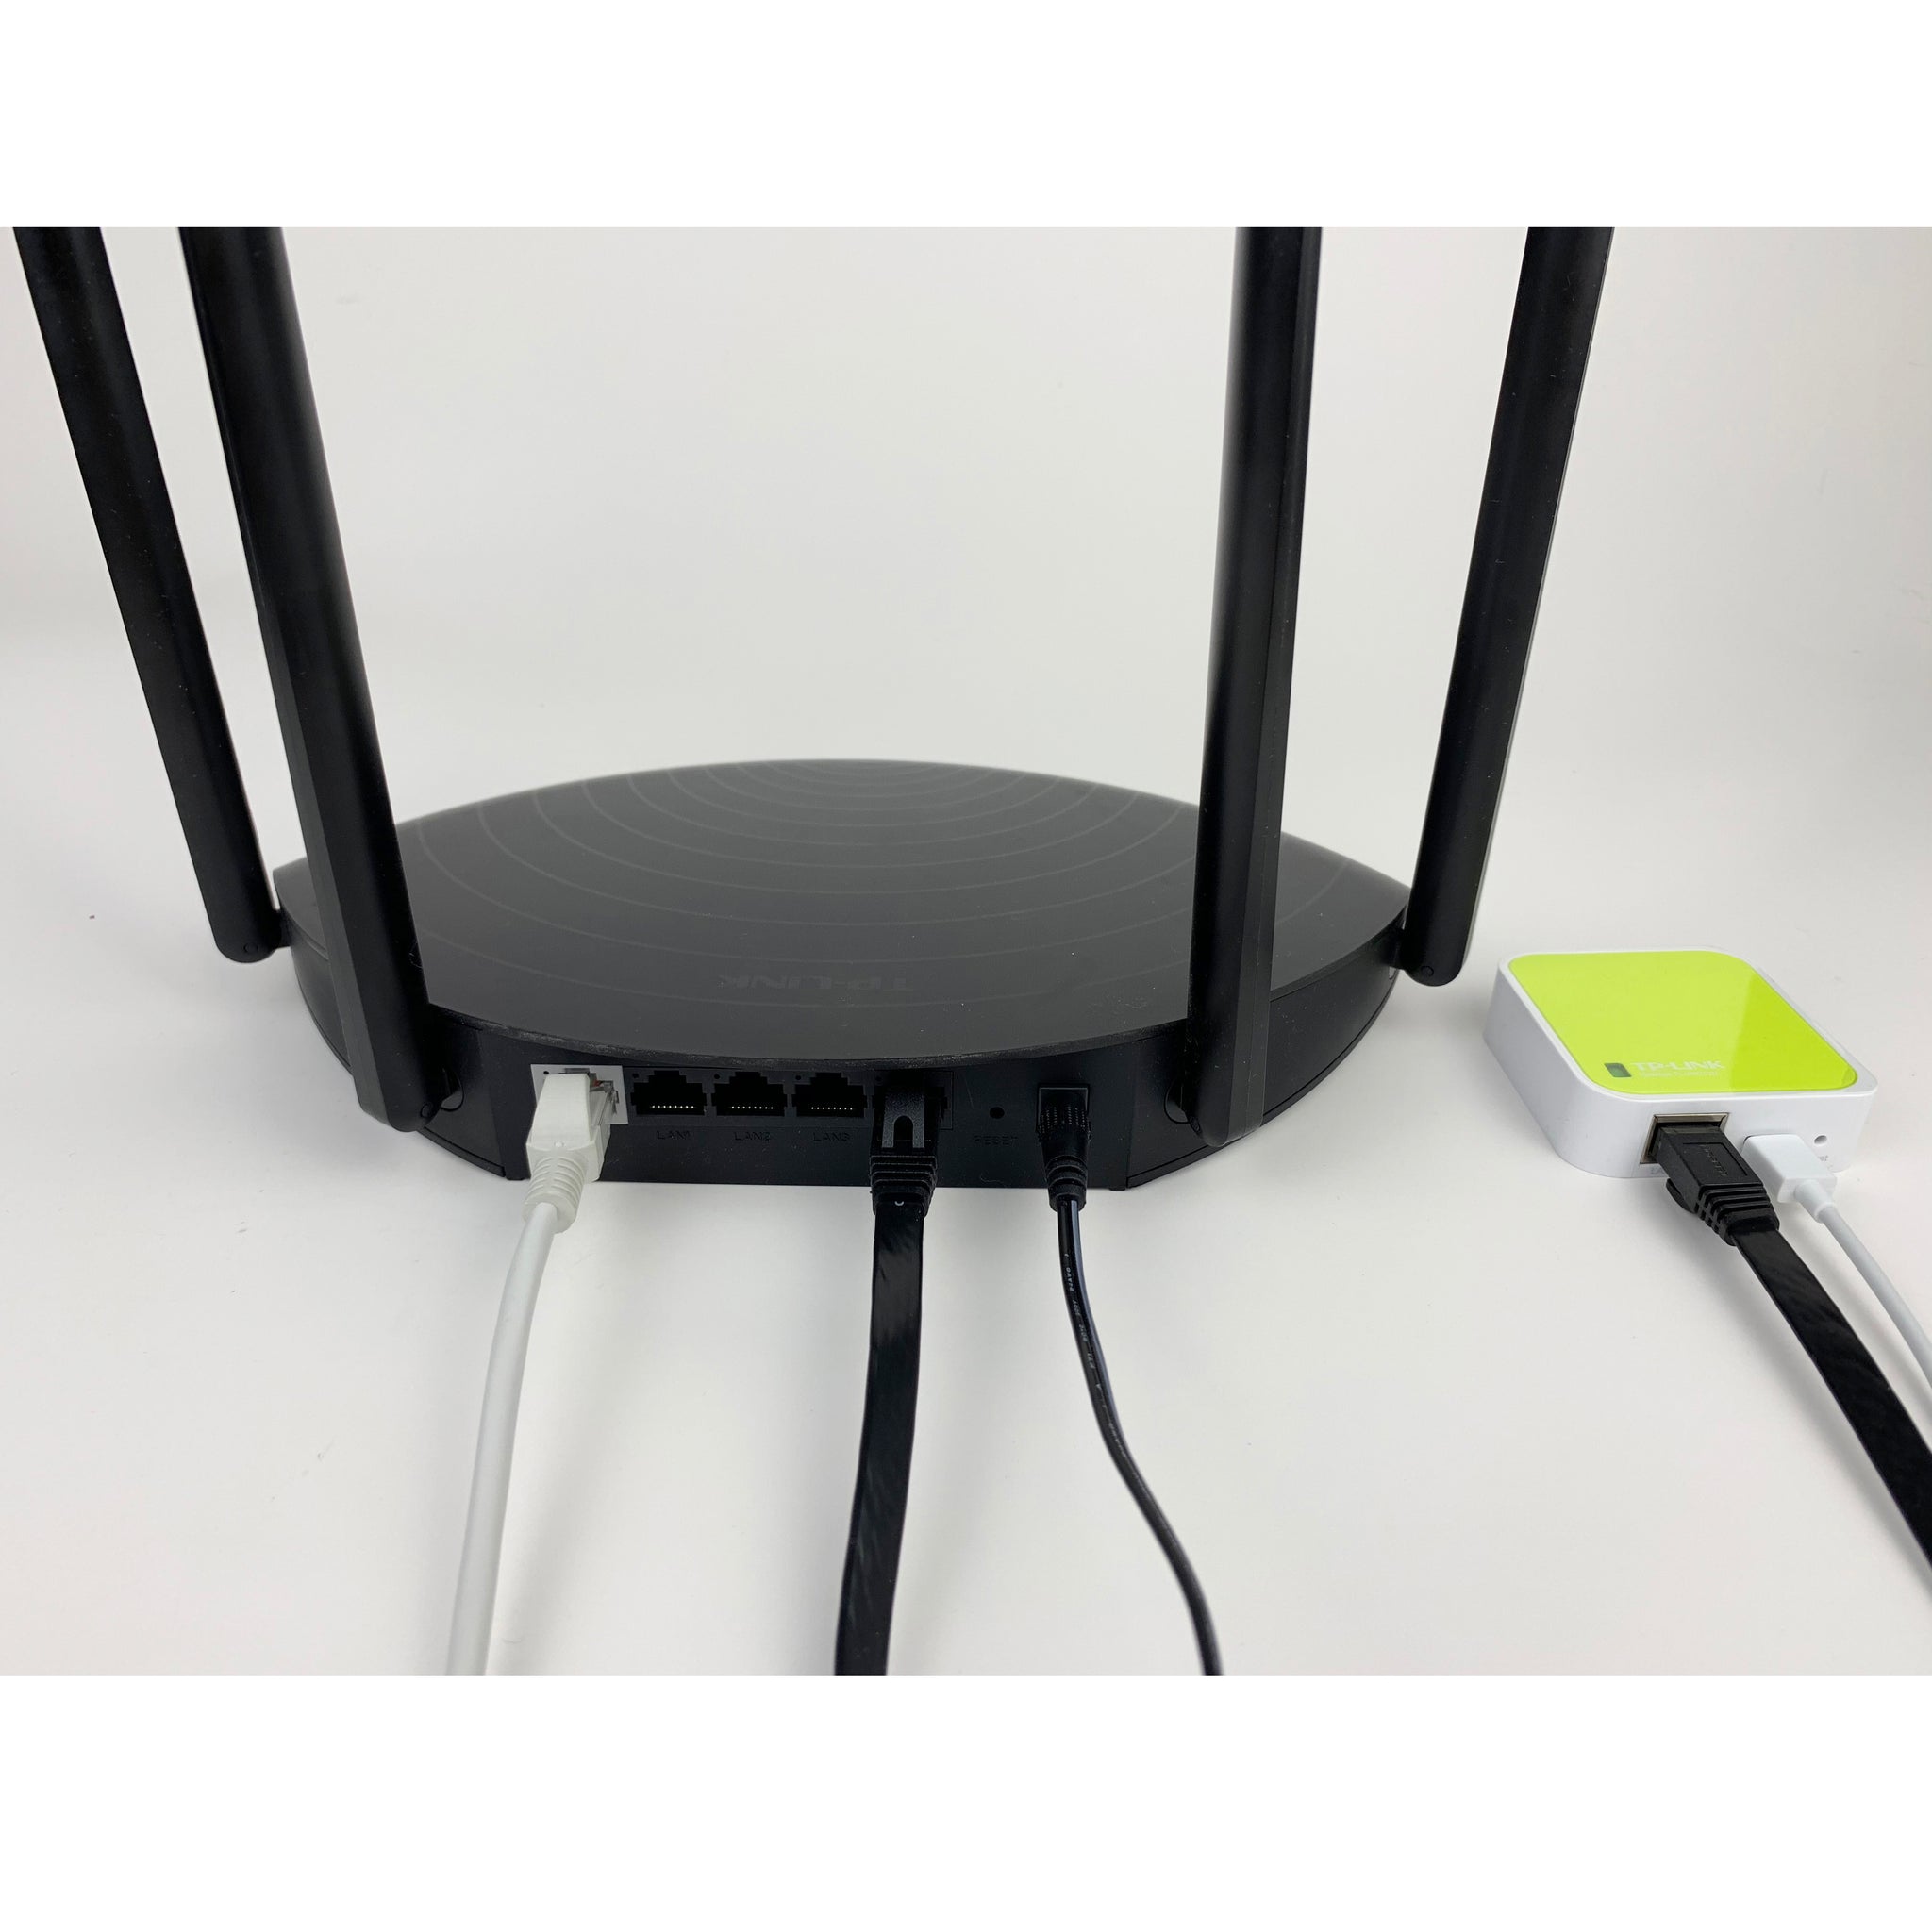 Connect Your Qi Aerista by Piggybacking Routers